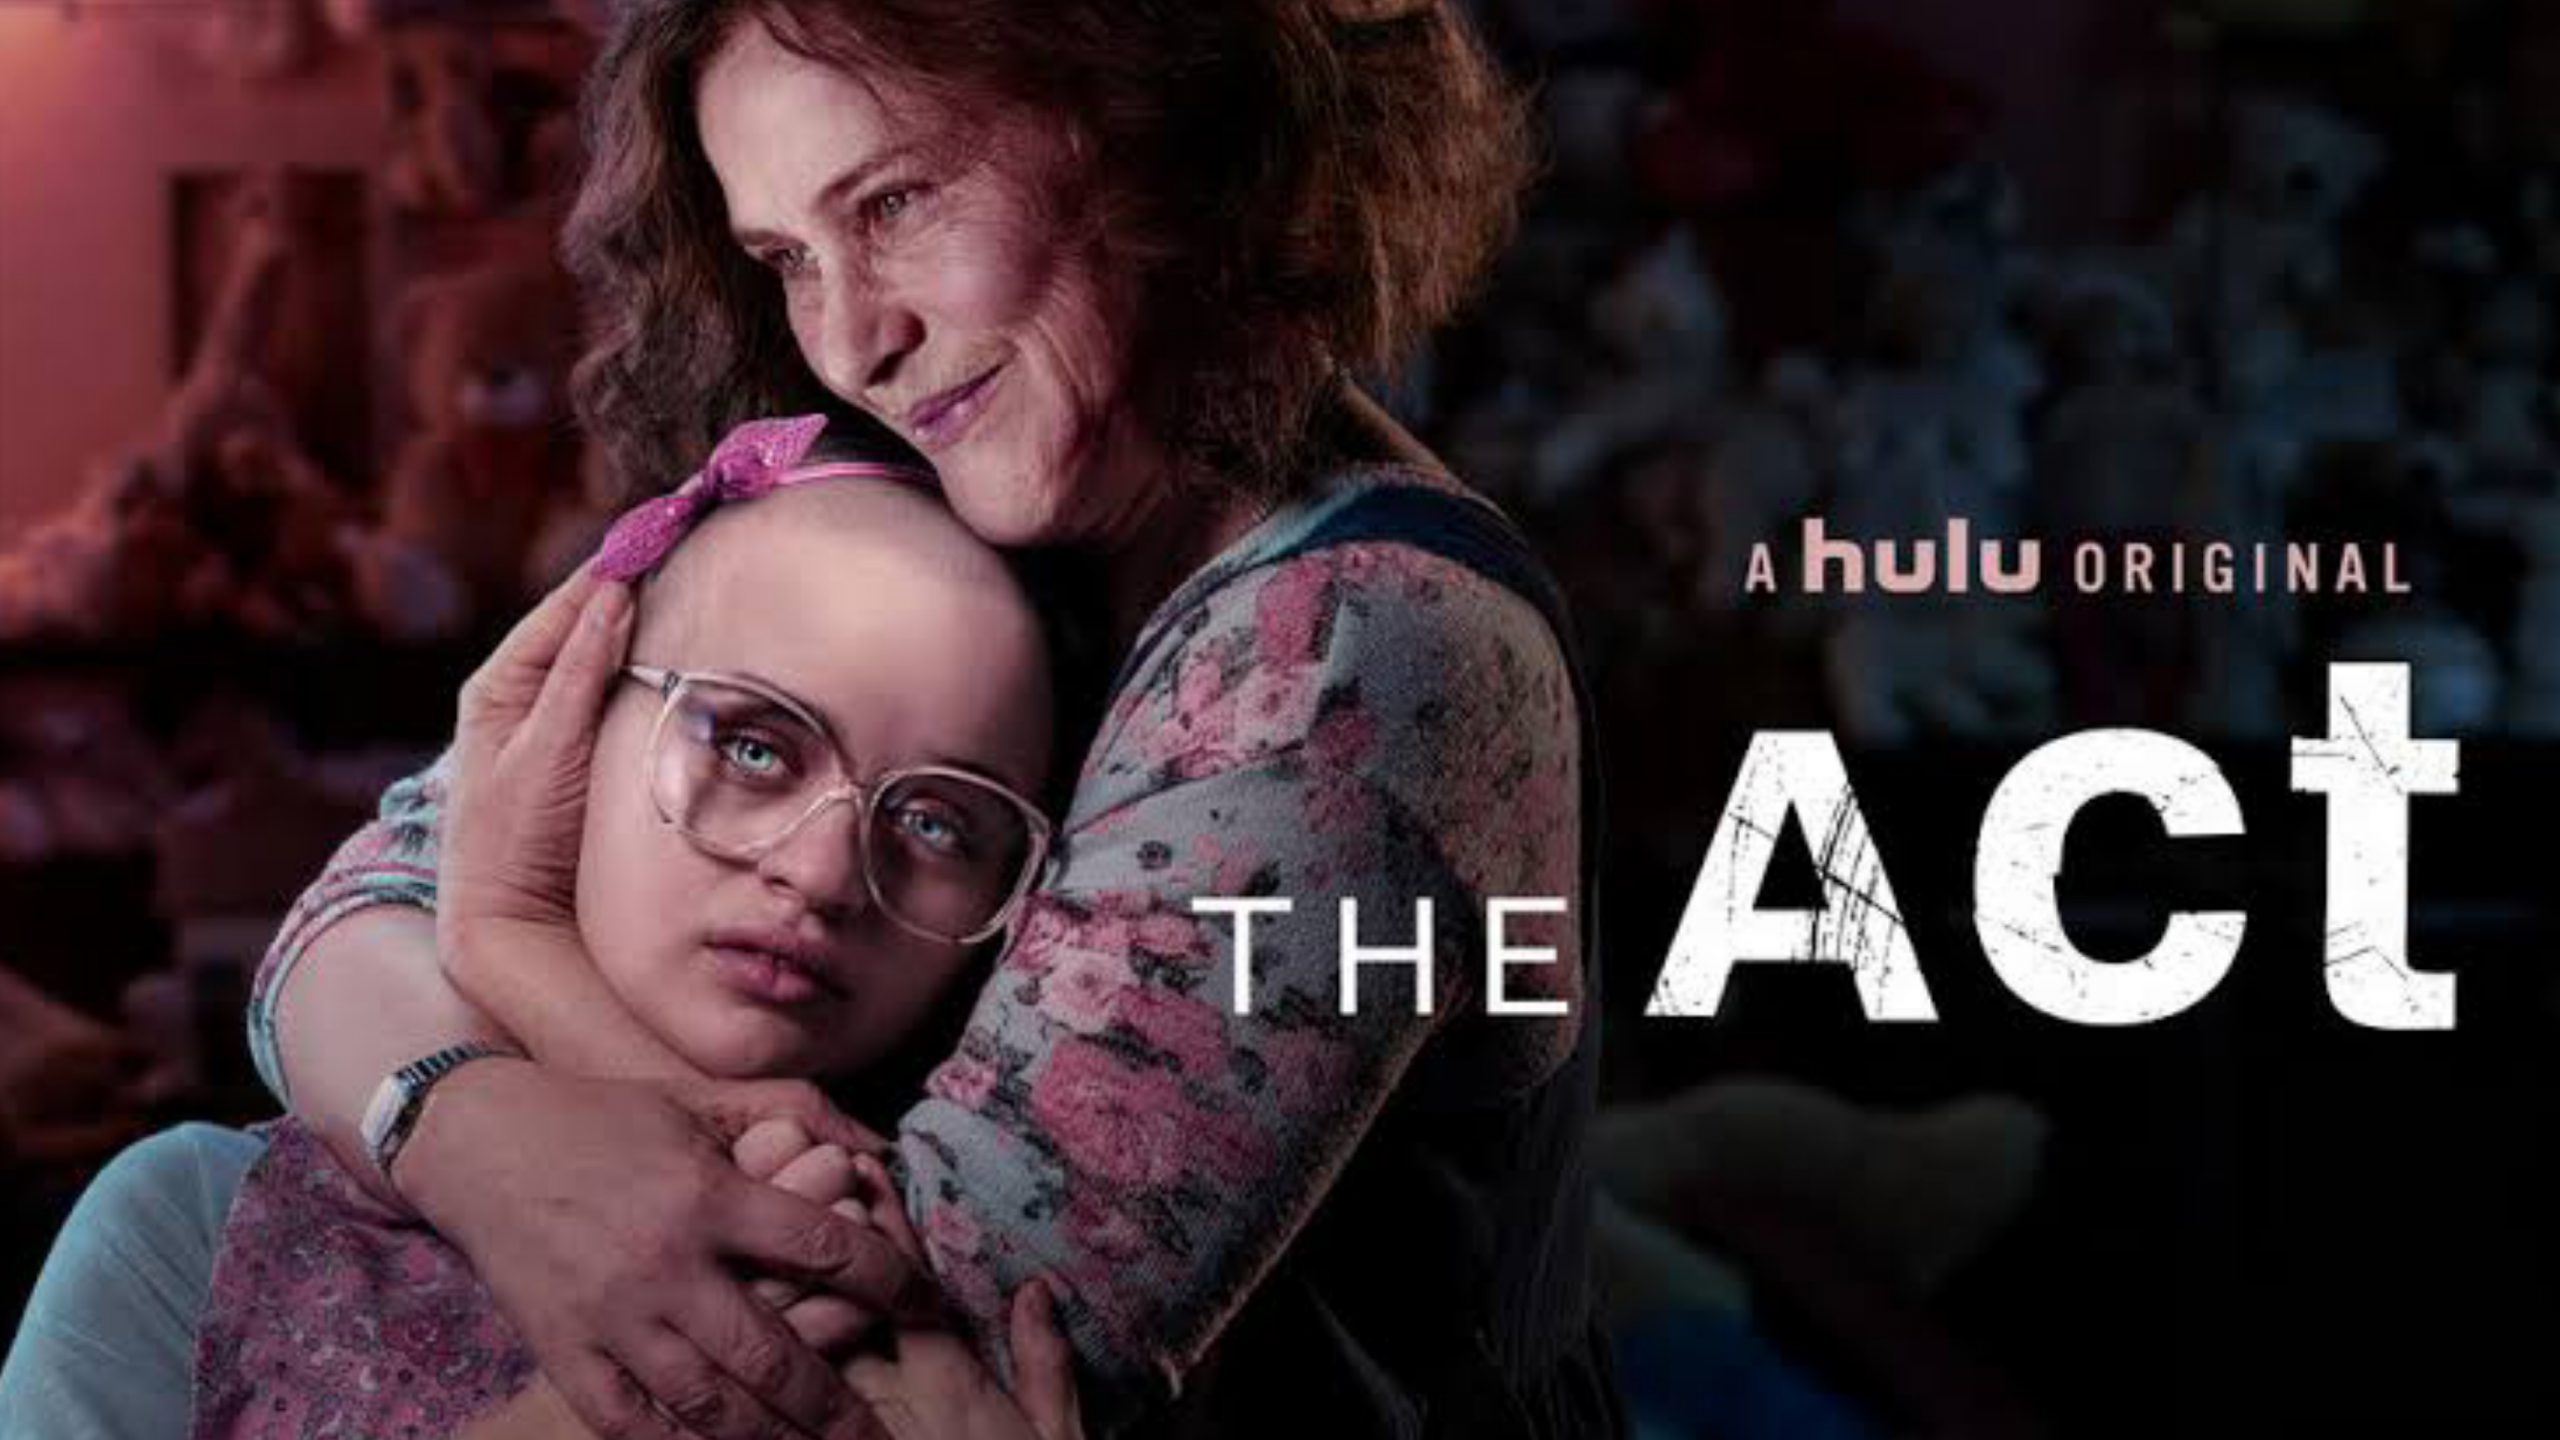 the act is based off of what true story